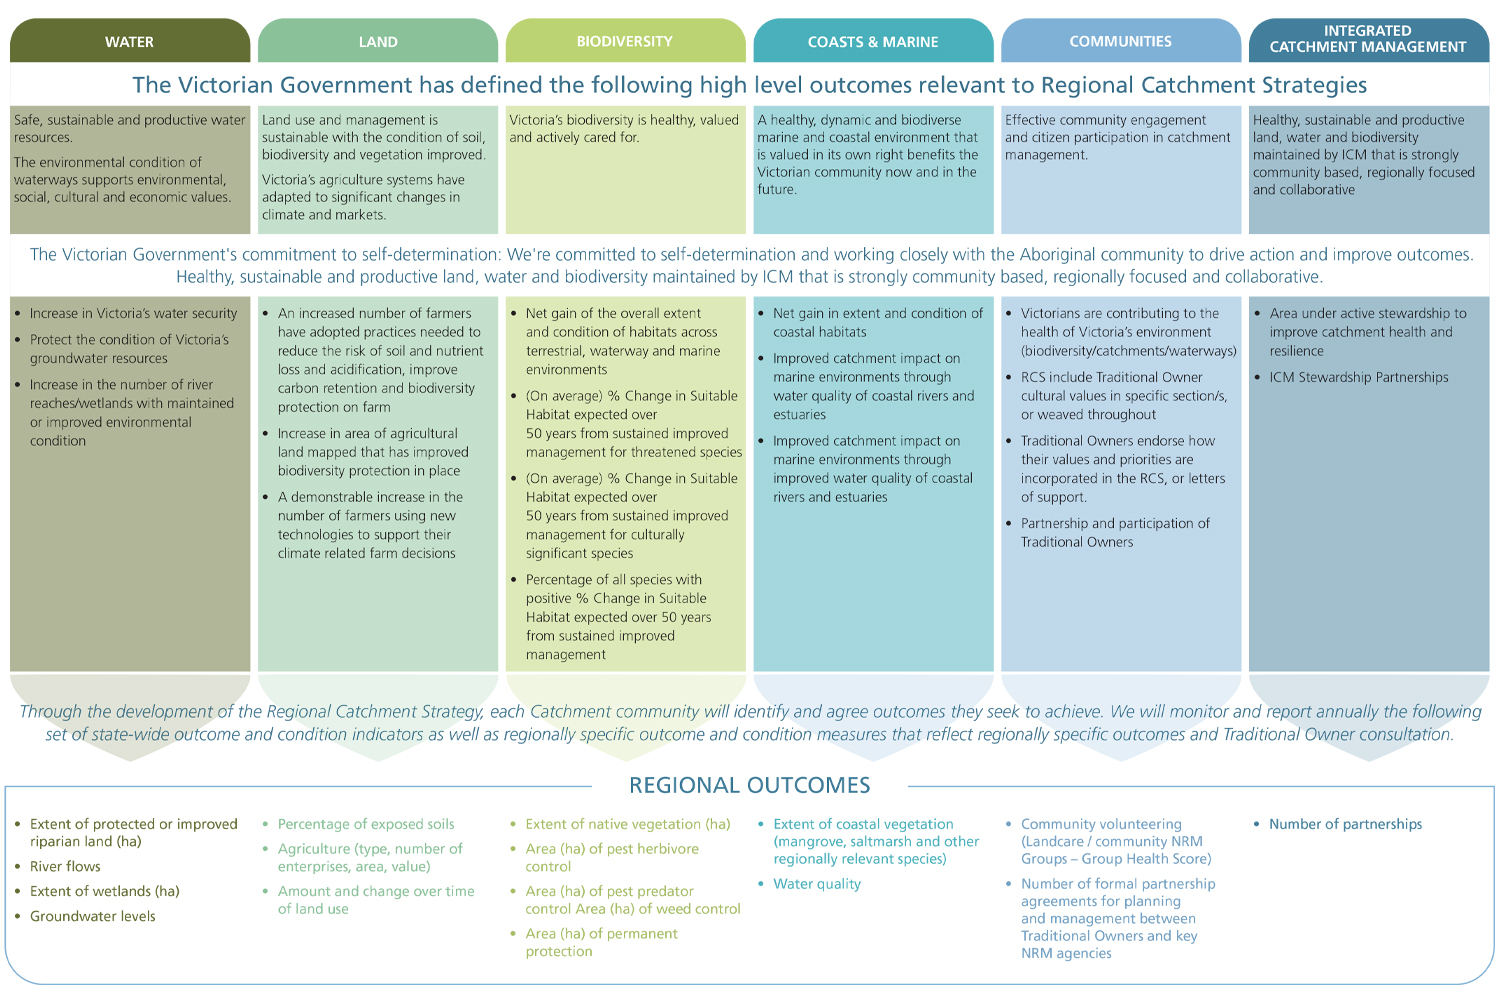 A diagram showing the West Gippsland Regional Catchment Strategy Outcomes Framework